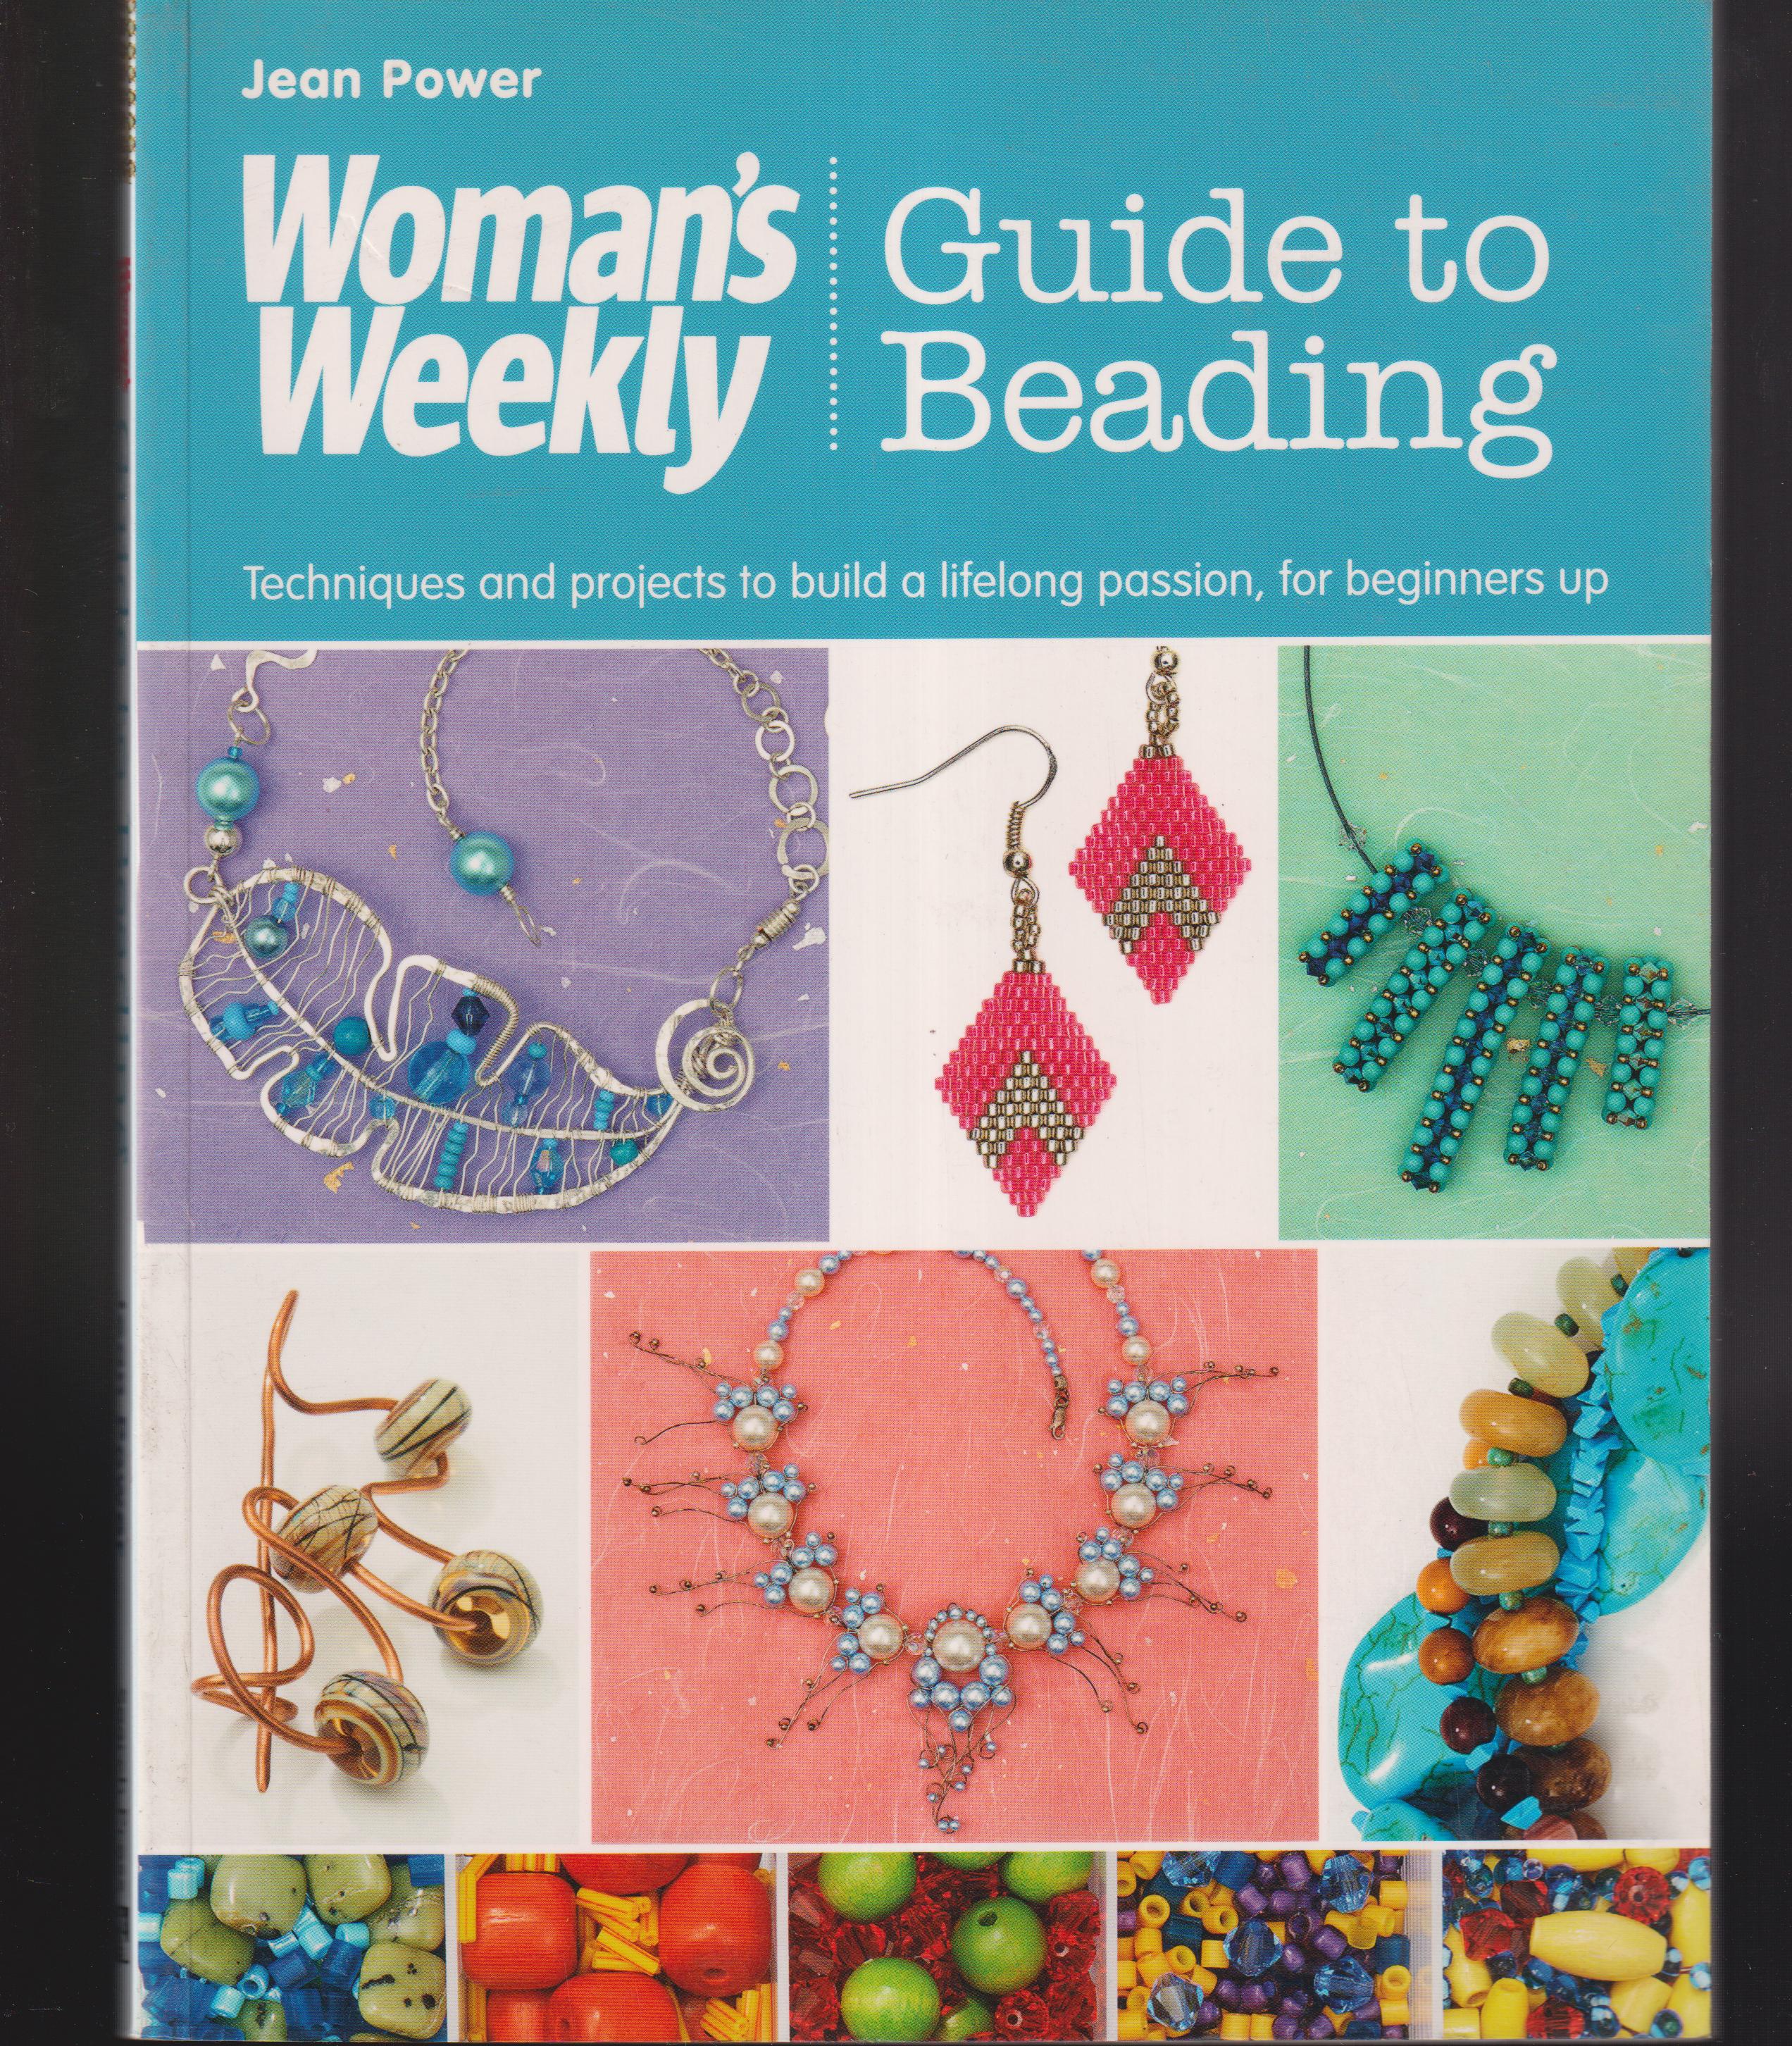 Beading: Techniques and Projects to Build a Lifelong Passion For